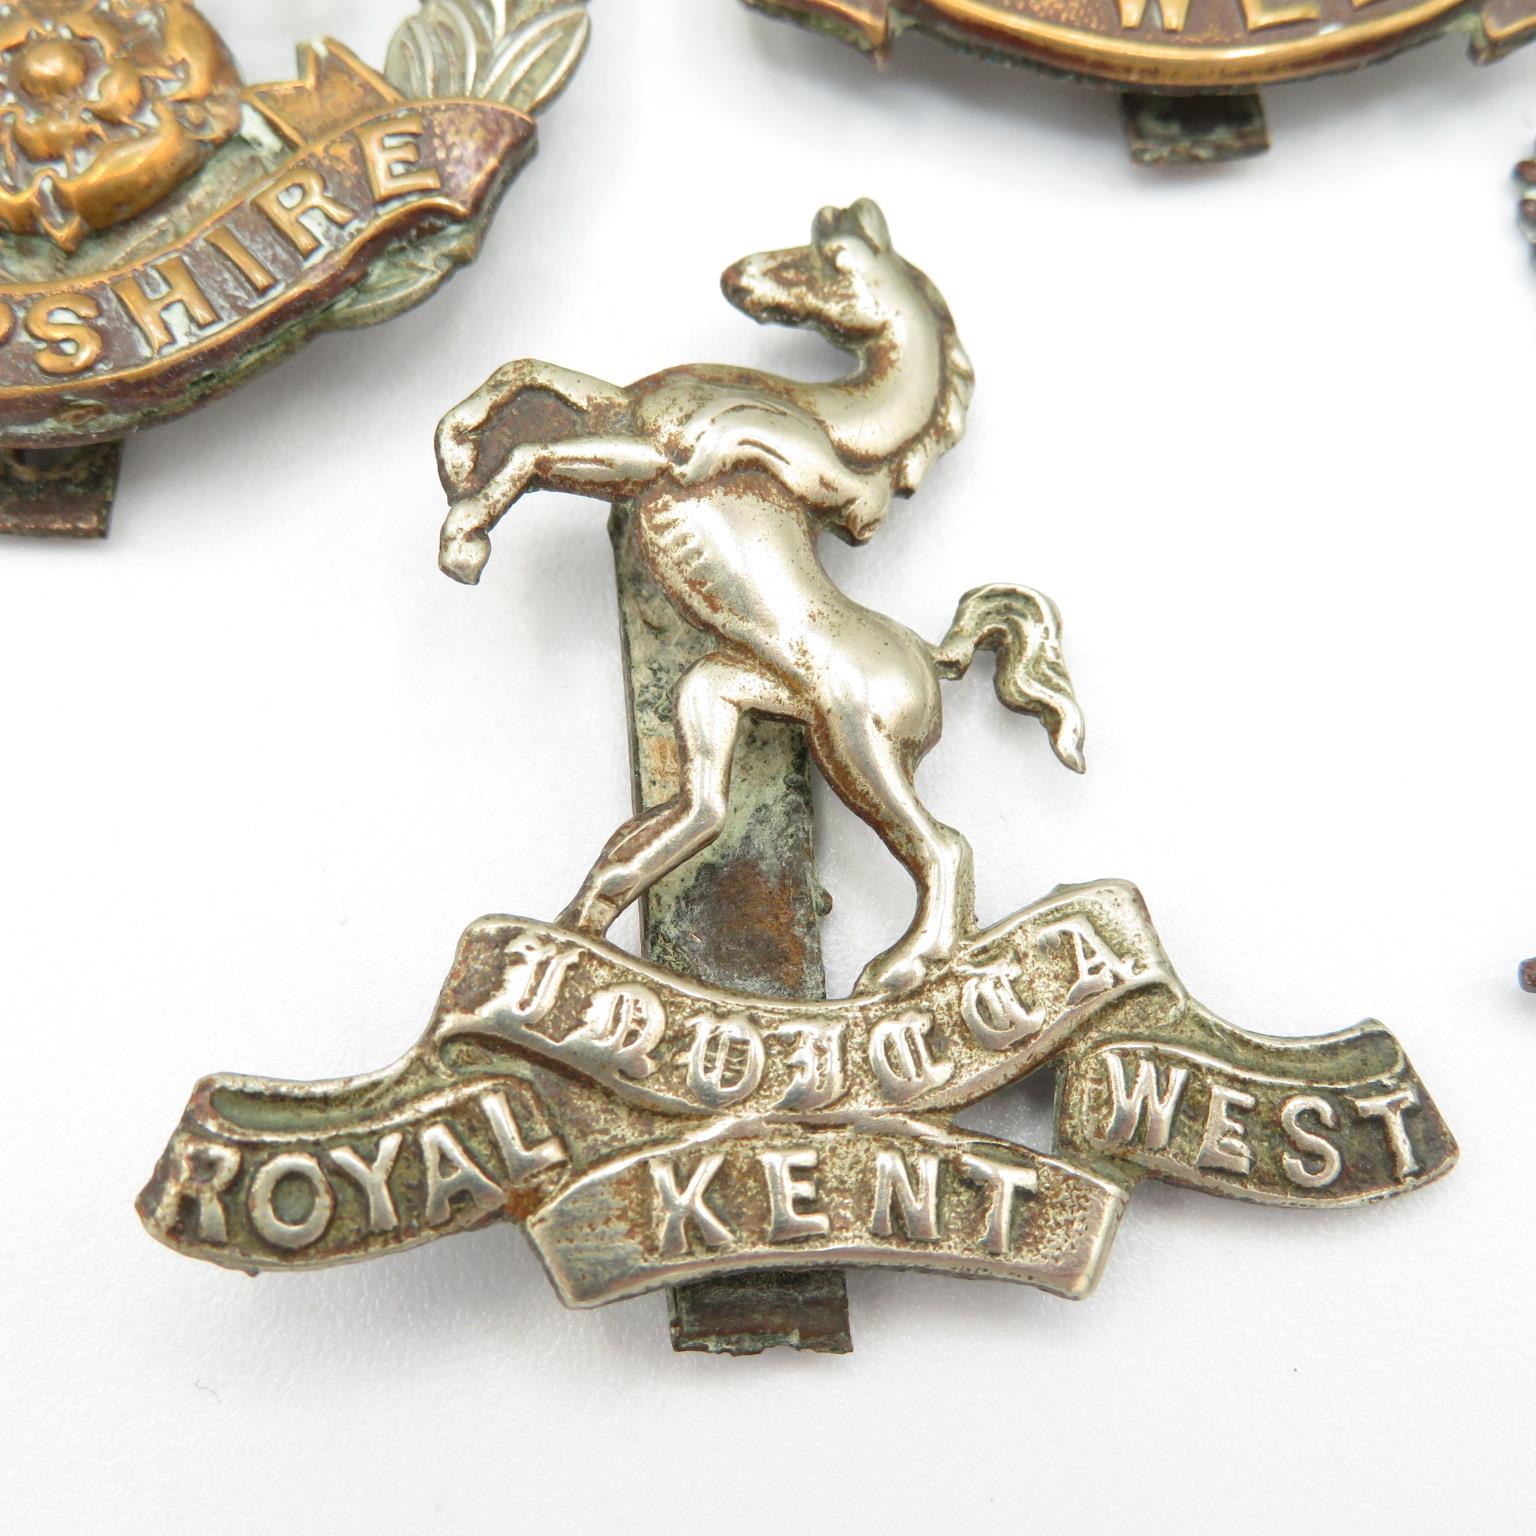 18x Military cap badges including Royal Scots Fusiliers and Lancers etc. - - Image 18 of 19